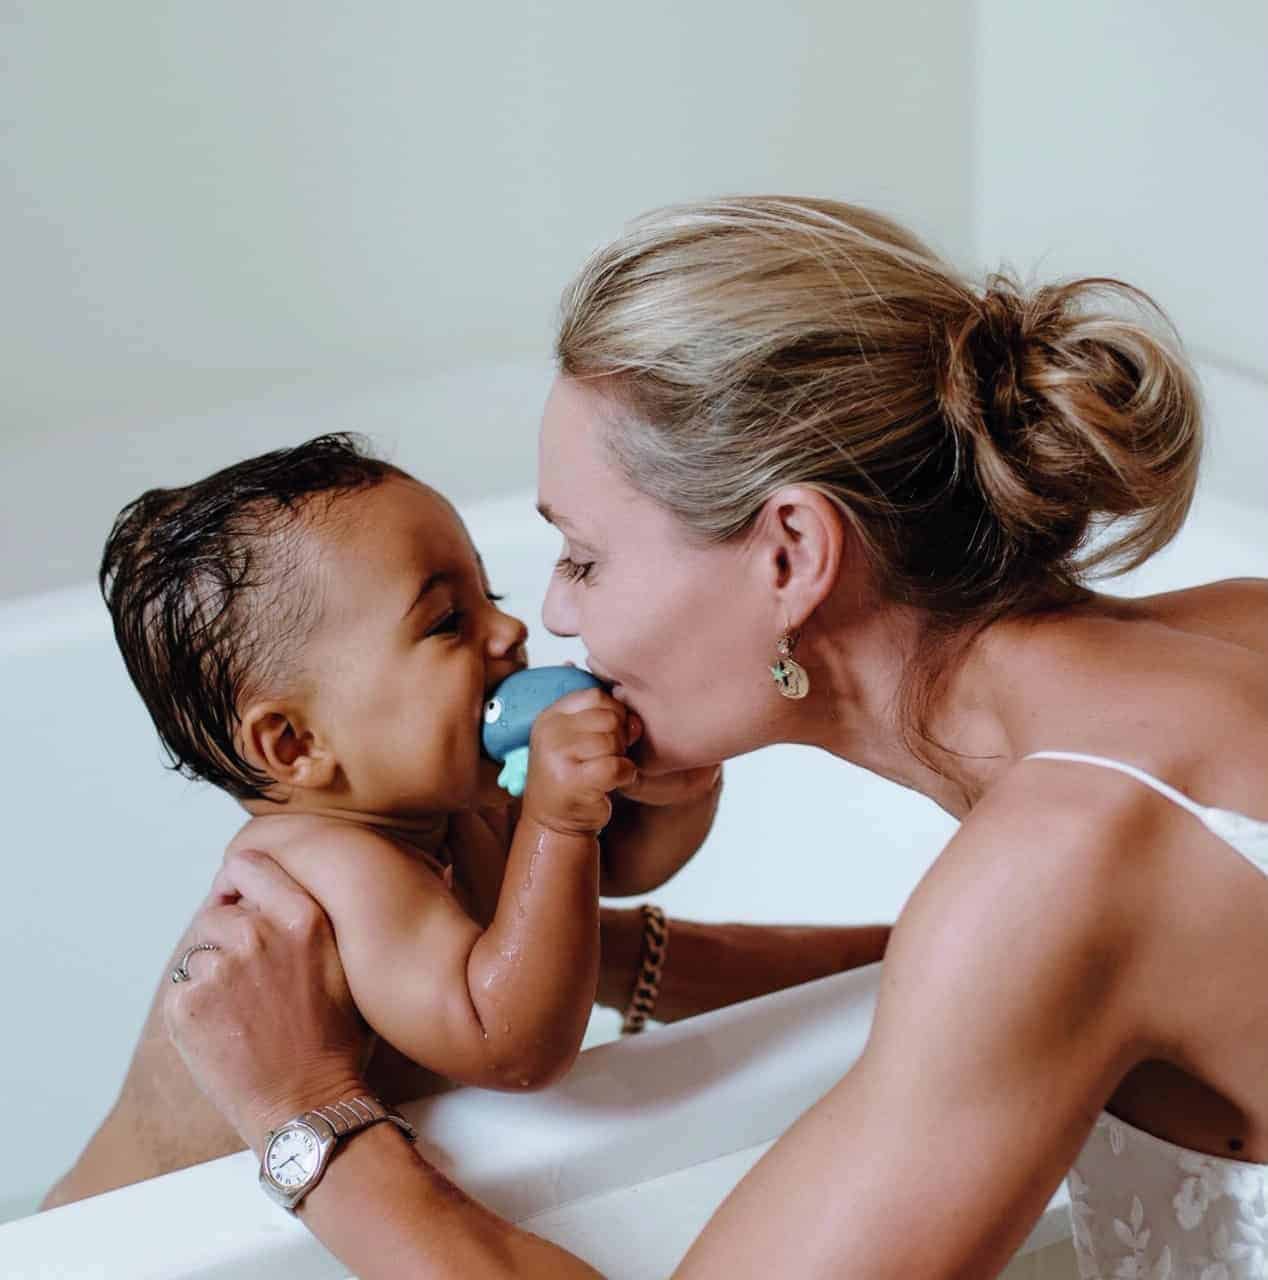 A woman carefully brushes her baby's teeth in a bathtub, ensuring every tooth is clean and healthy.